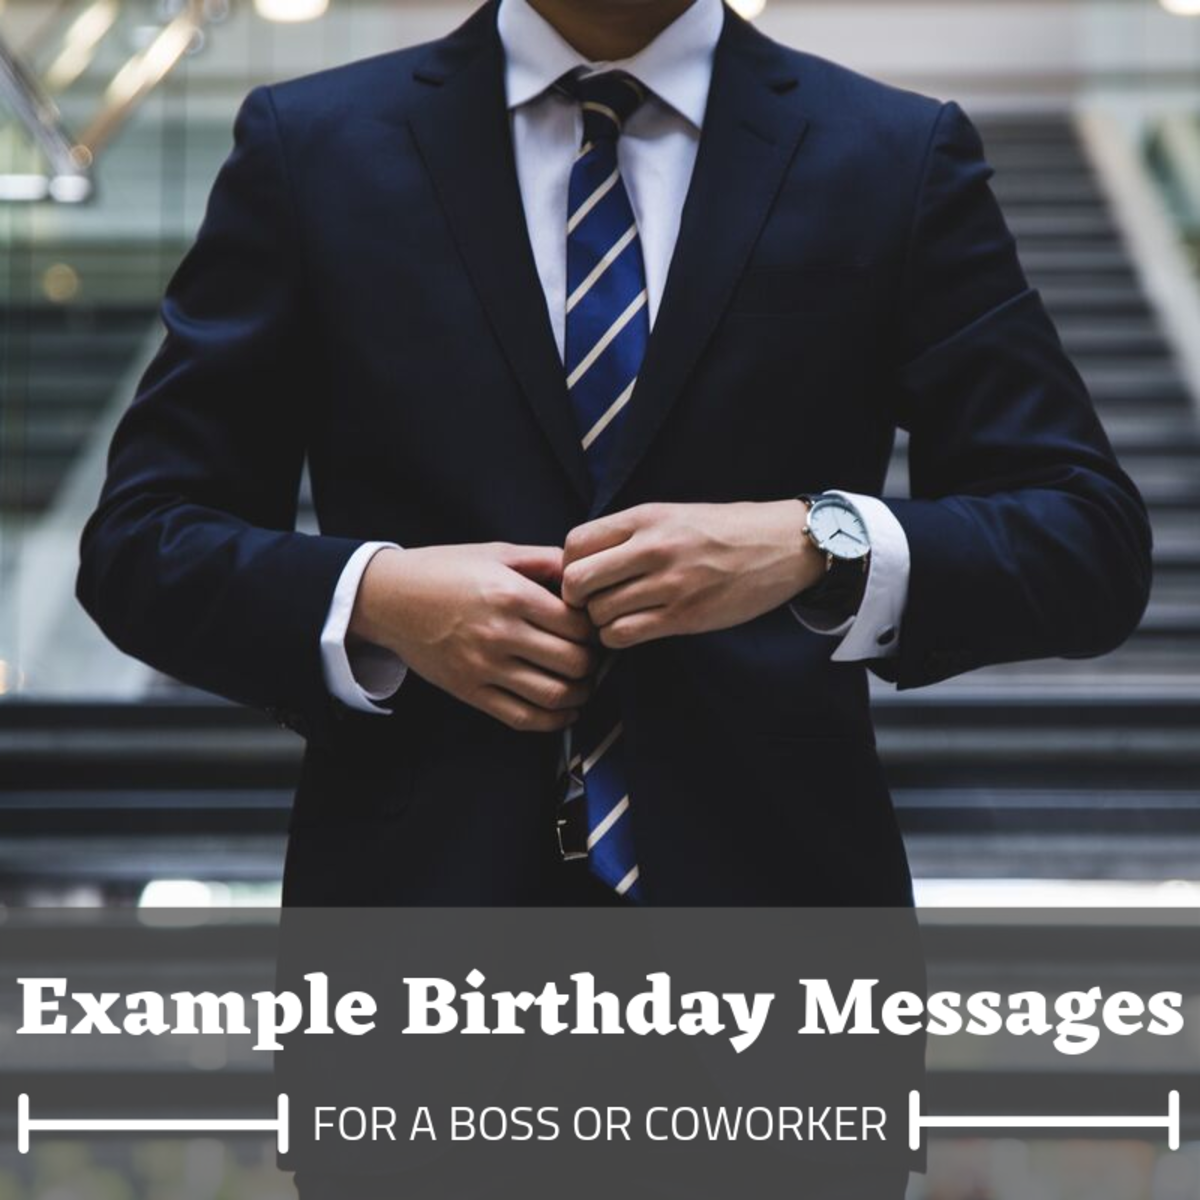 Birthday Wishes for Co-Workers and Bosses: What to Write in a Card